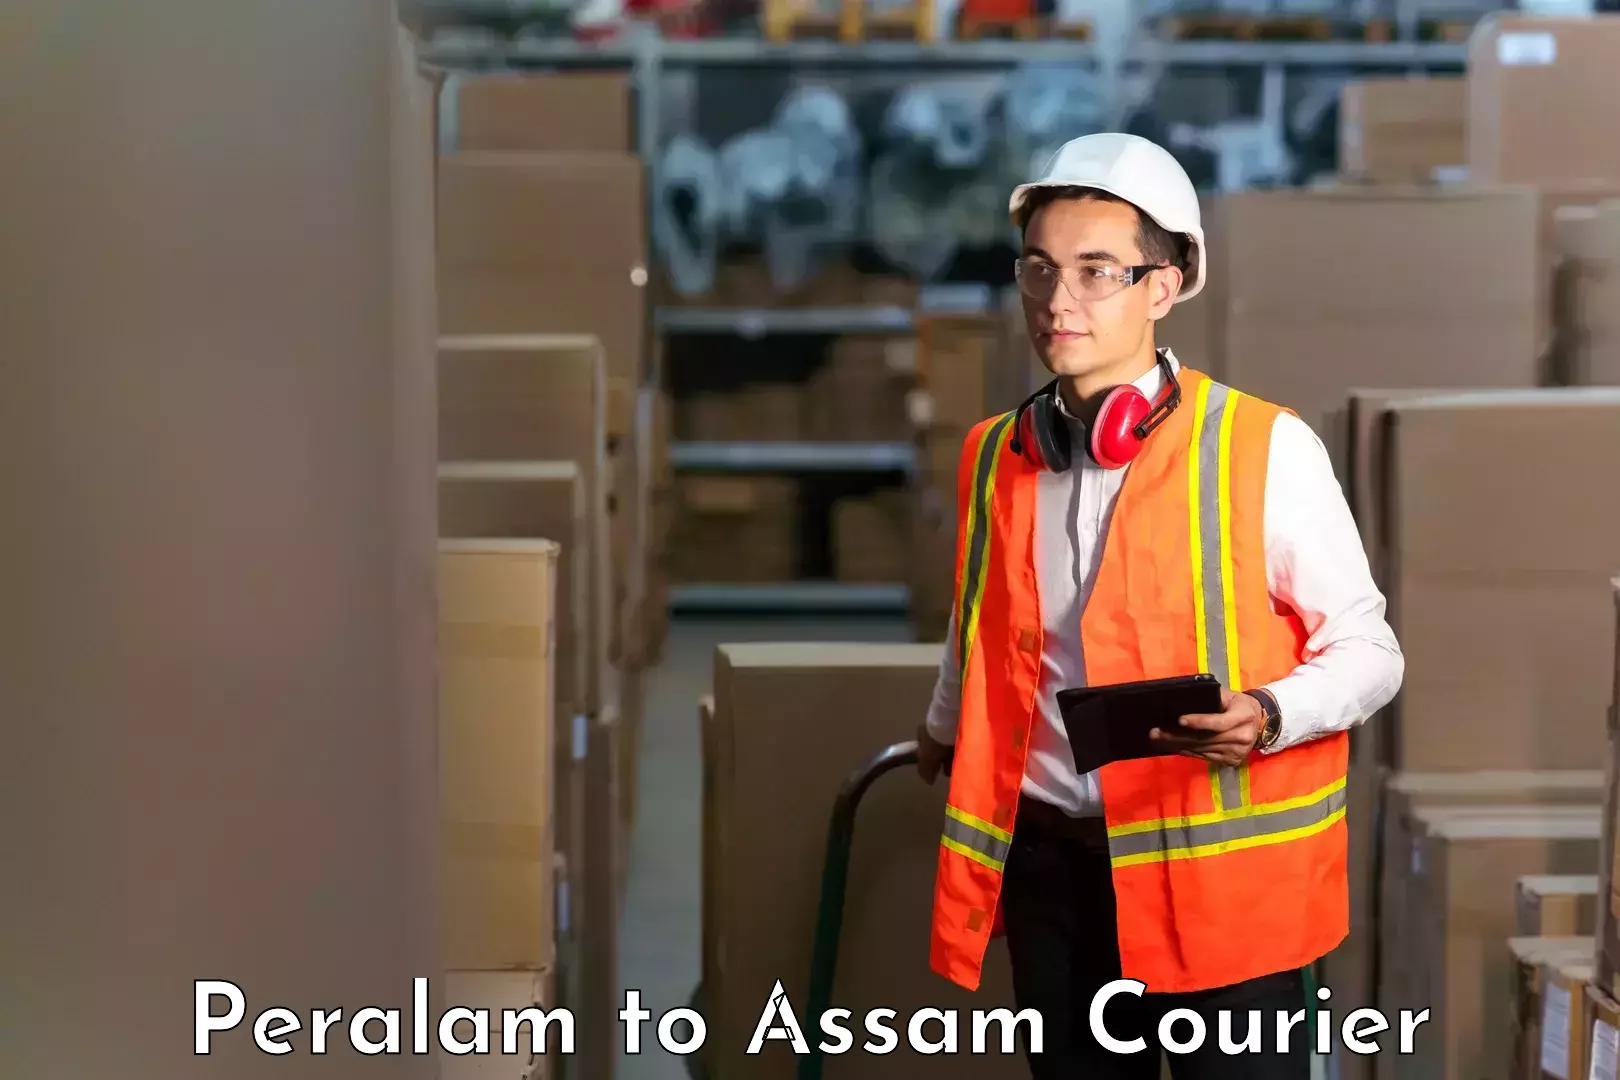 On-call courier service Peralam to Lala Assam